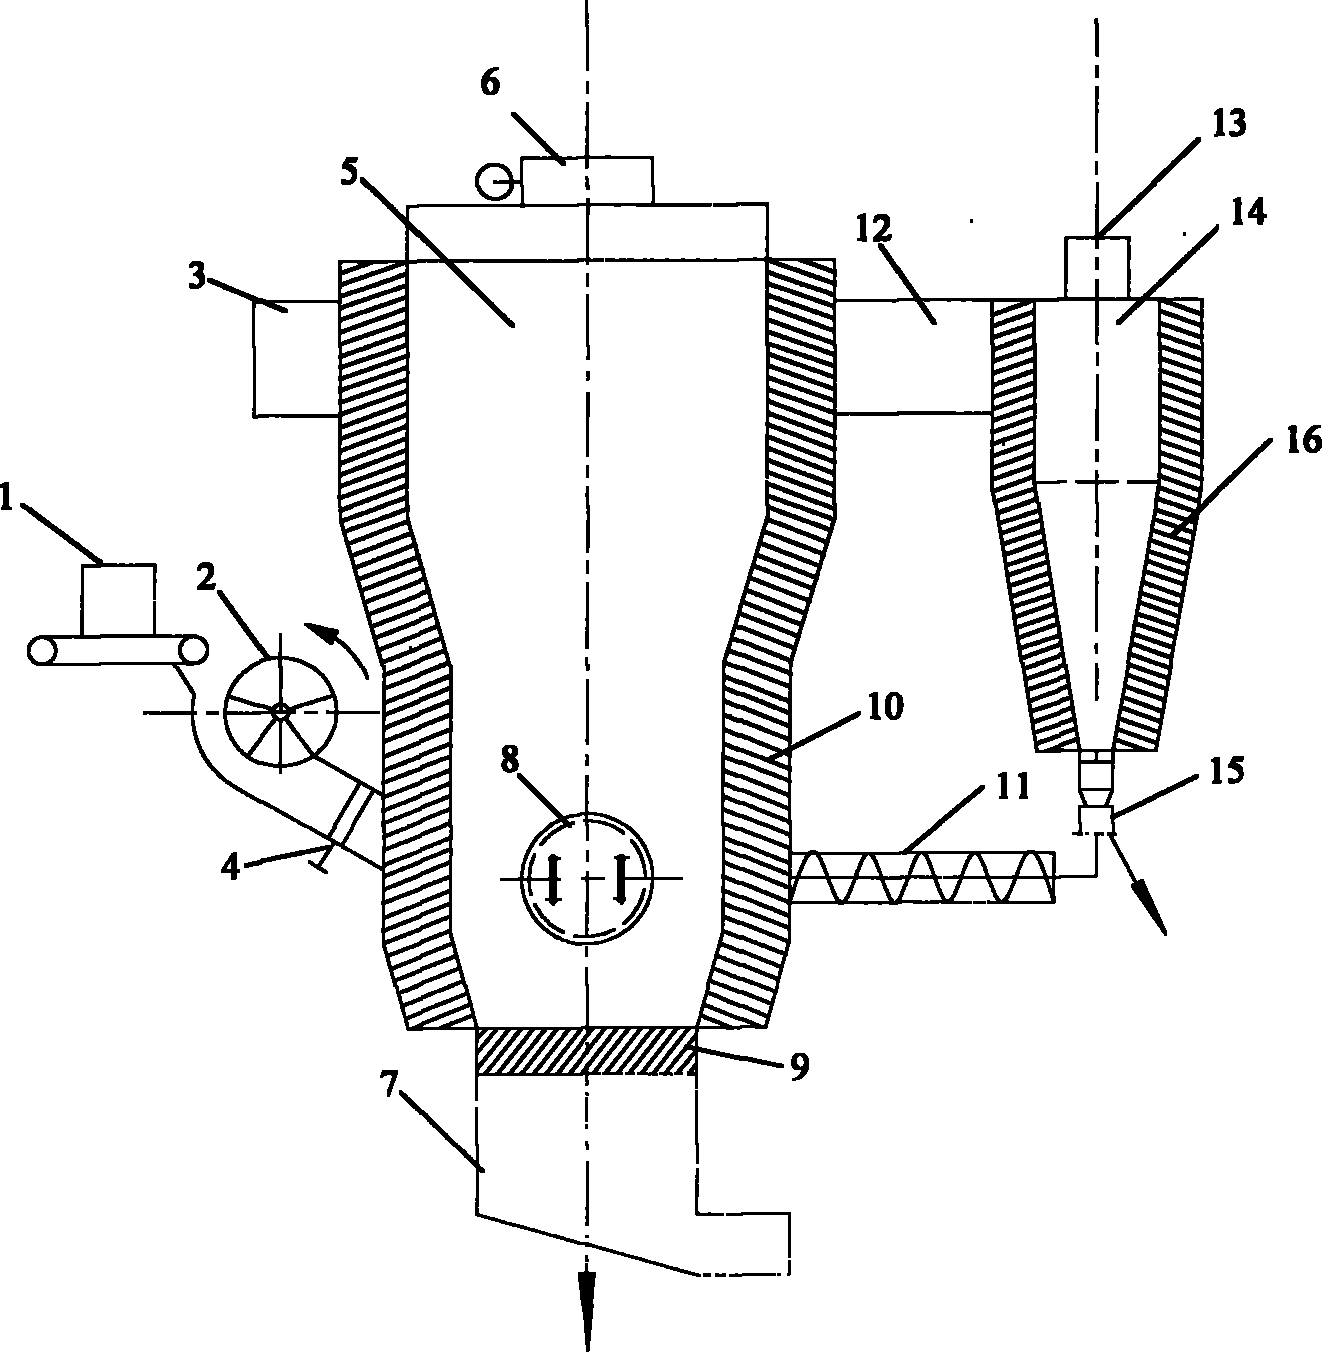 Fluidized bed gasification reaction method and reactor employing packed fuel